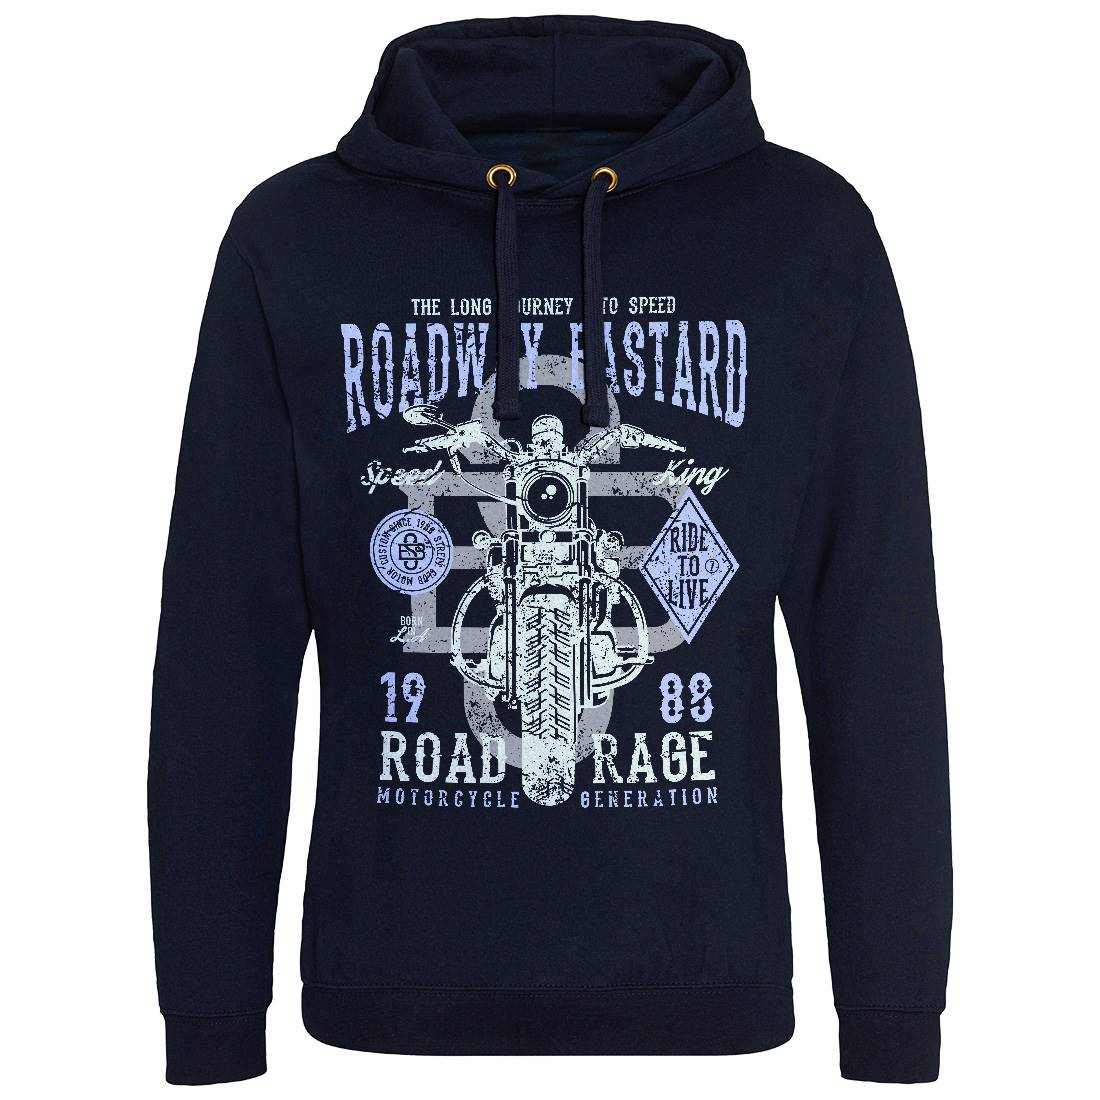 Roadway Bastard Mens Hoodie Without Pocket Motorcycles A123